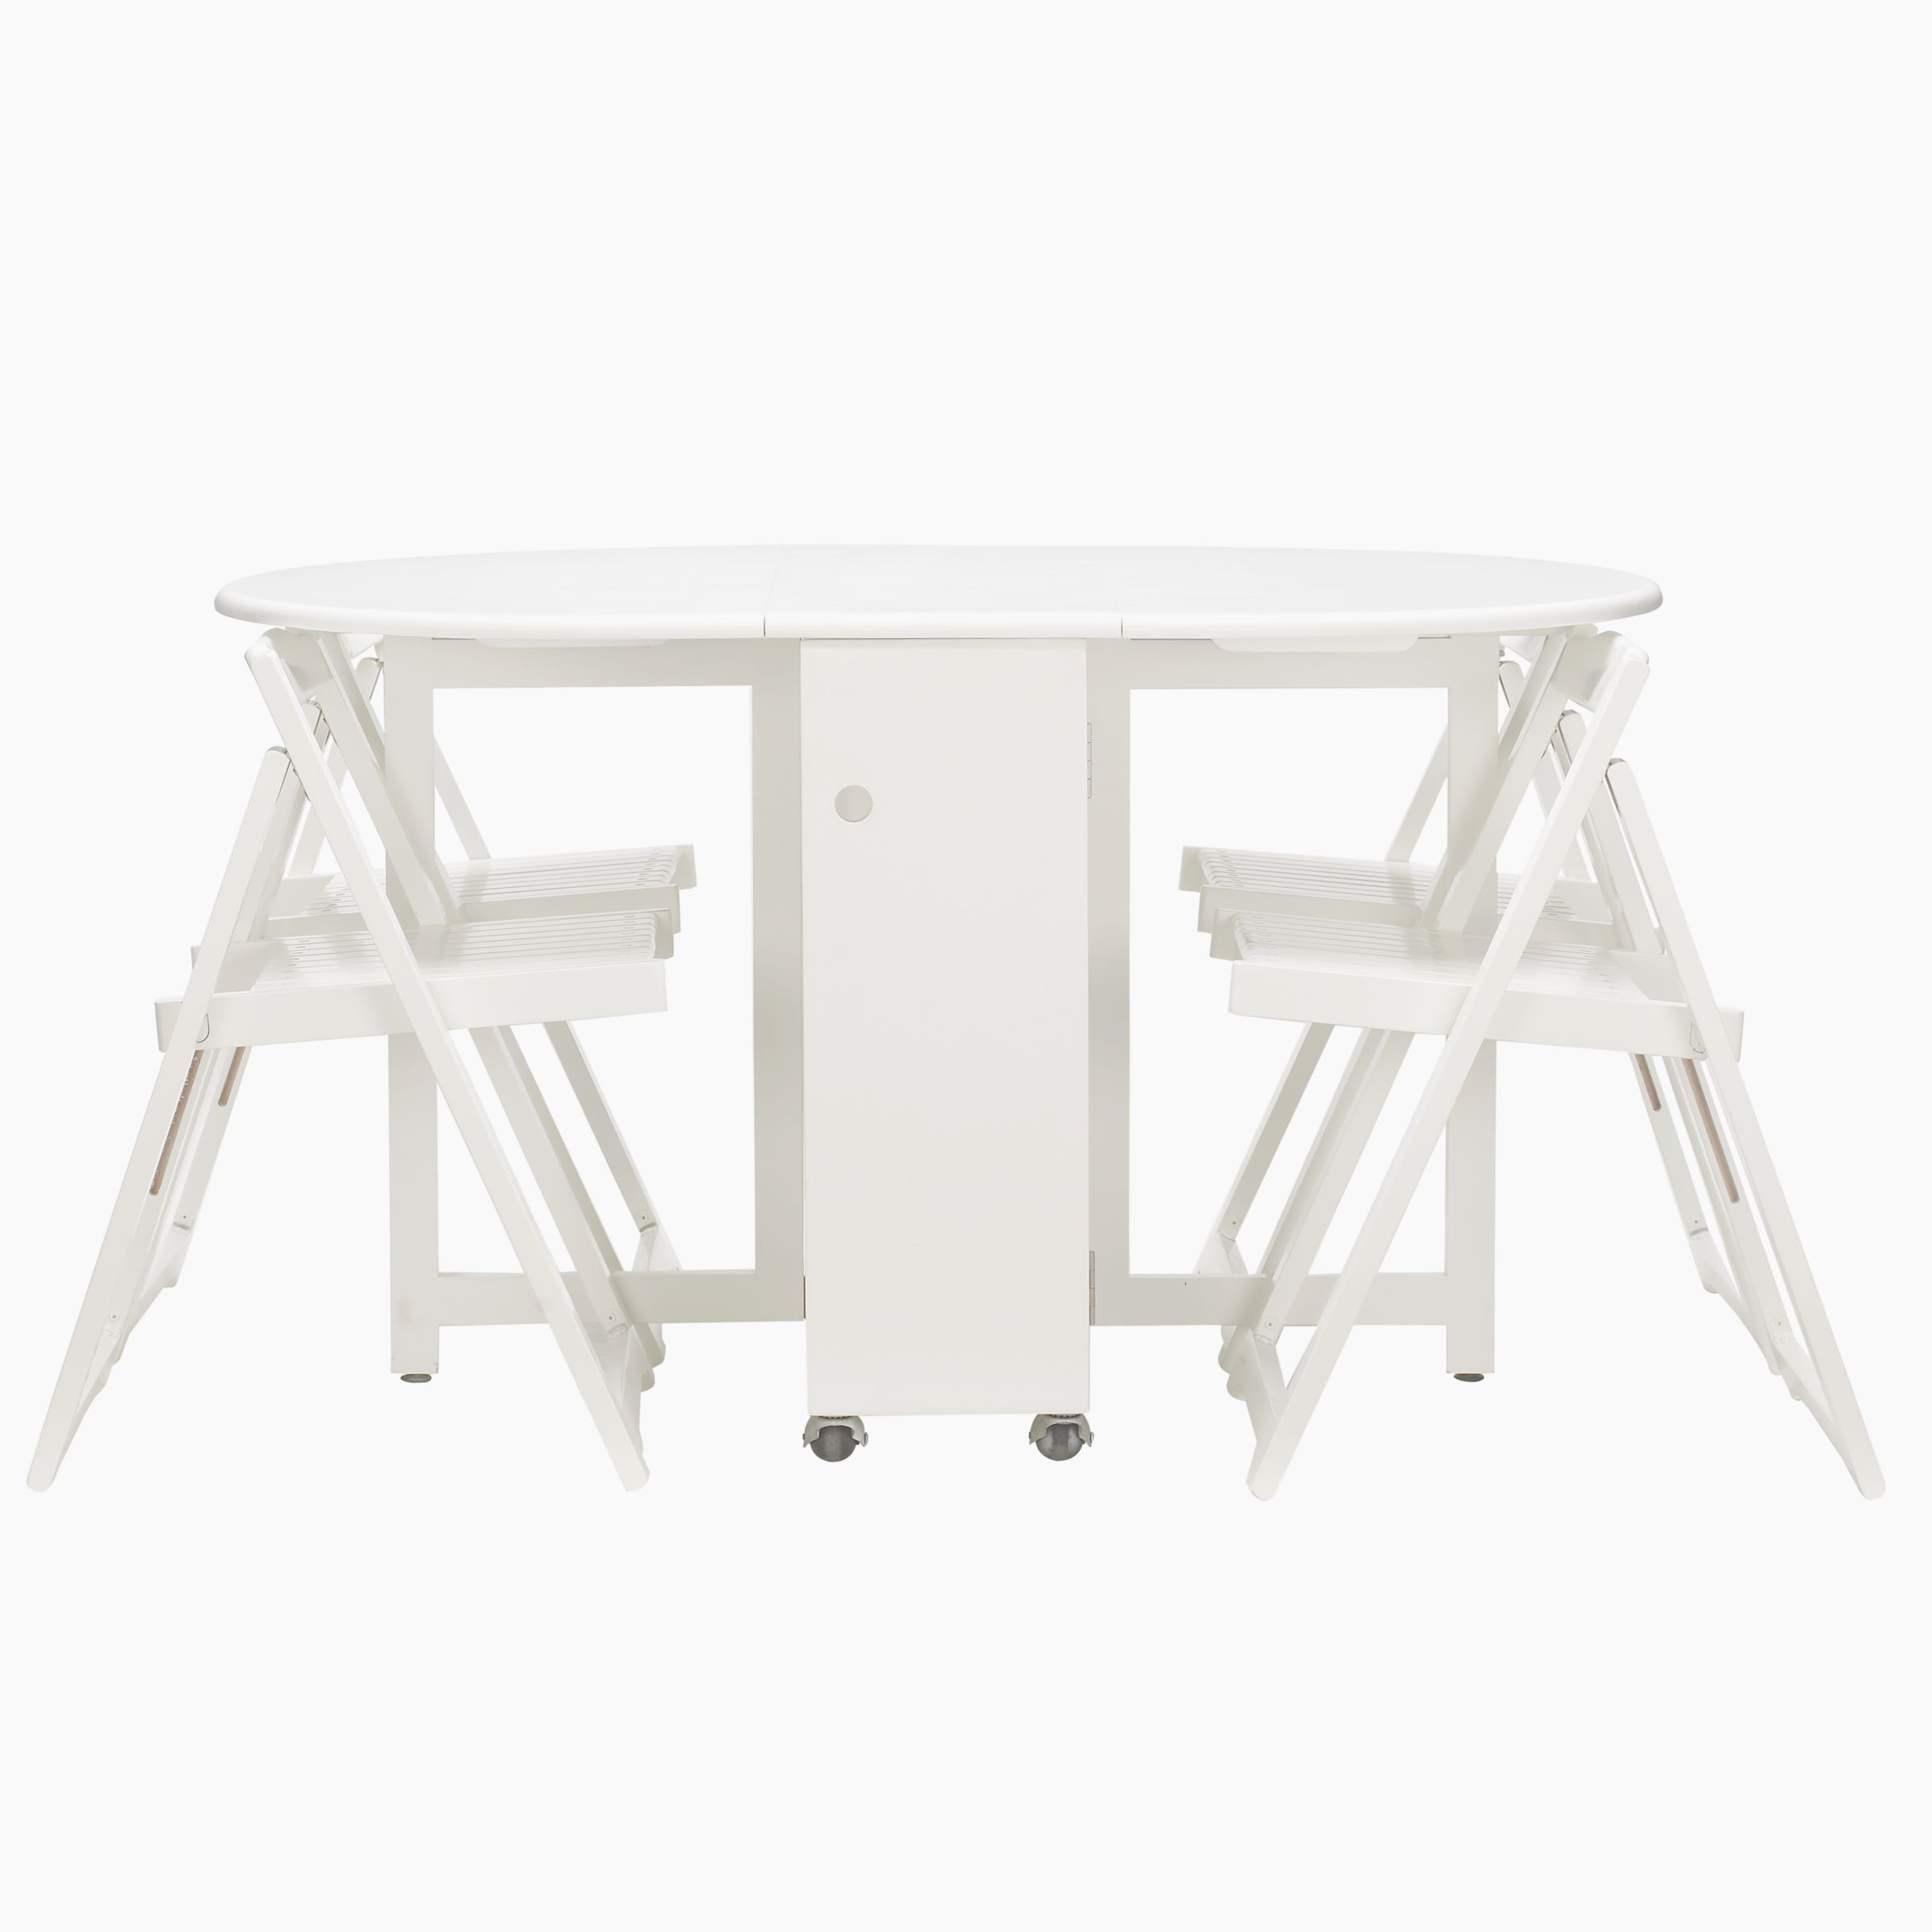 John Lewis Butterfly Folding Table and Four Chairs, White at John Lewis